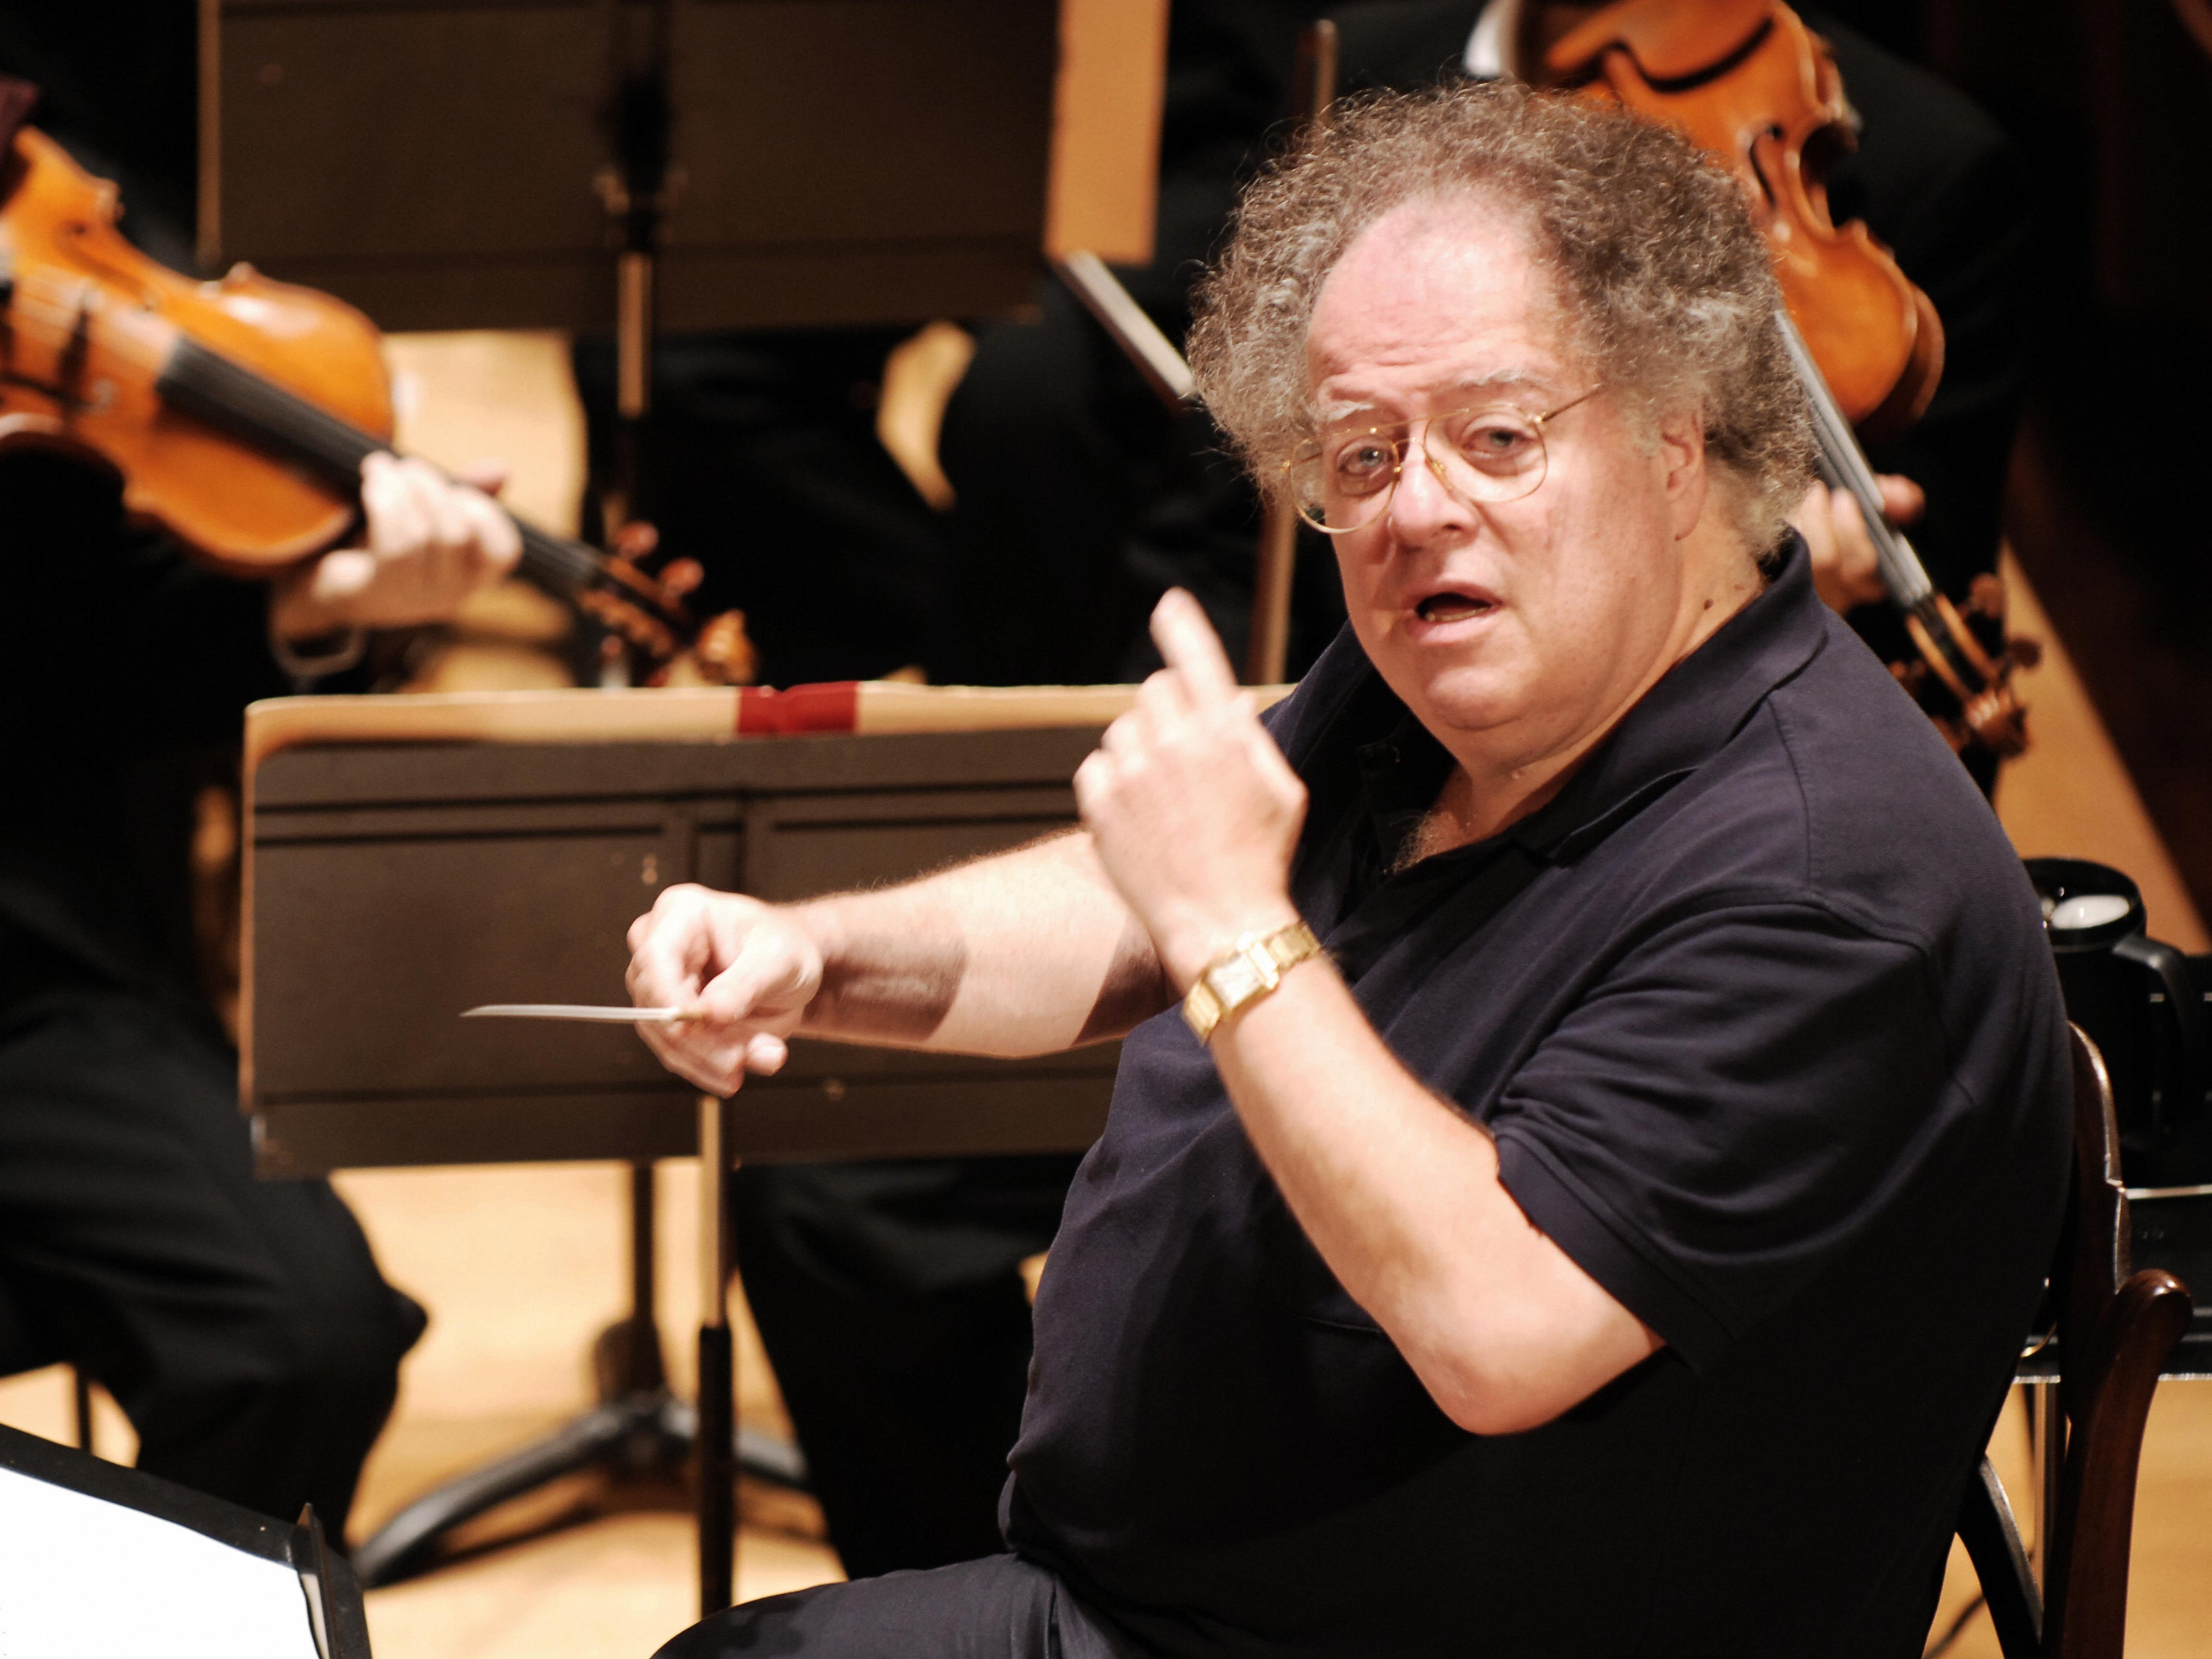 James Levine and the Boston Symphony Orchestra perform Hector Berlioz’s ‘Damnation of Faust’ on 4 September 2007 at the Salle Pleyel in Paris, France